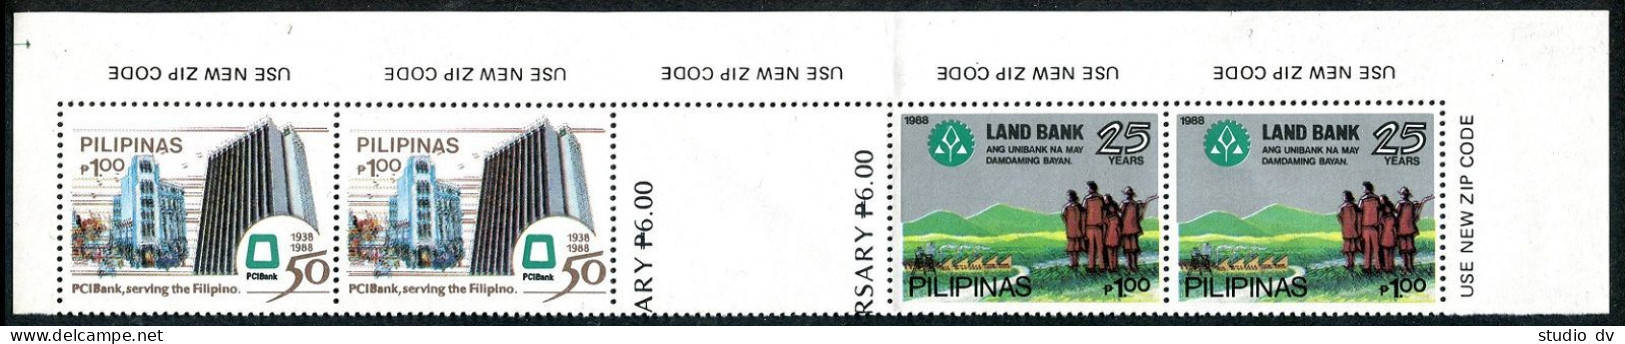 Philippines 1943-1944 Strip/2 Pairs, MNH. Mi 1872-1873. Land, Commercial  Banks. - Philippinen